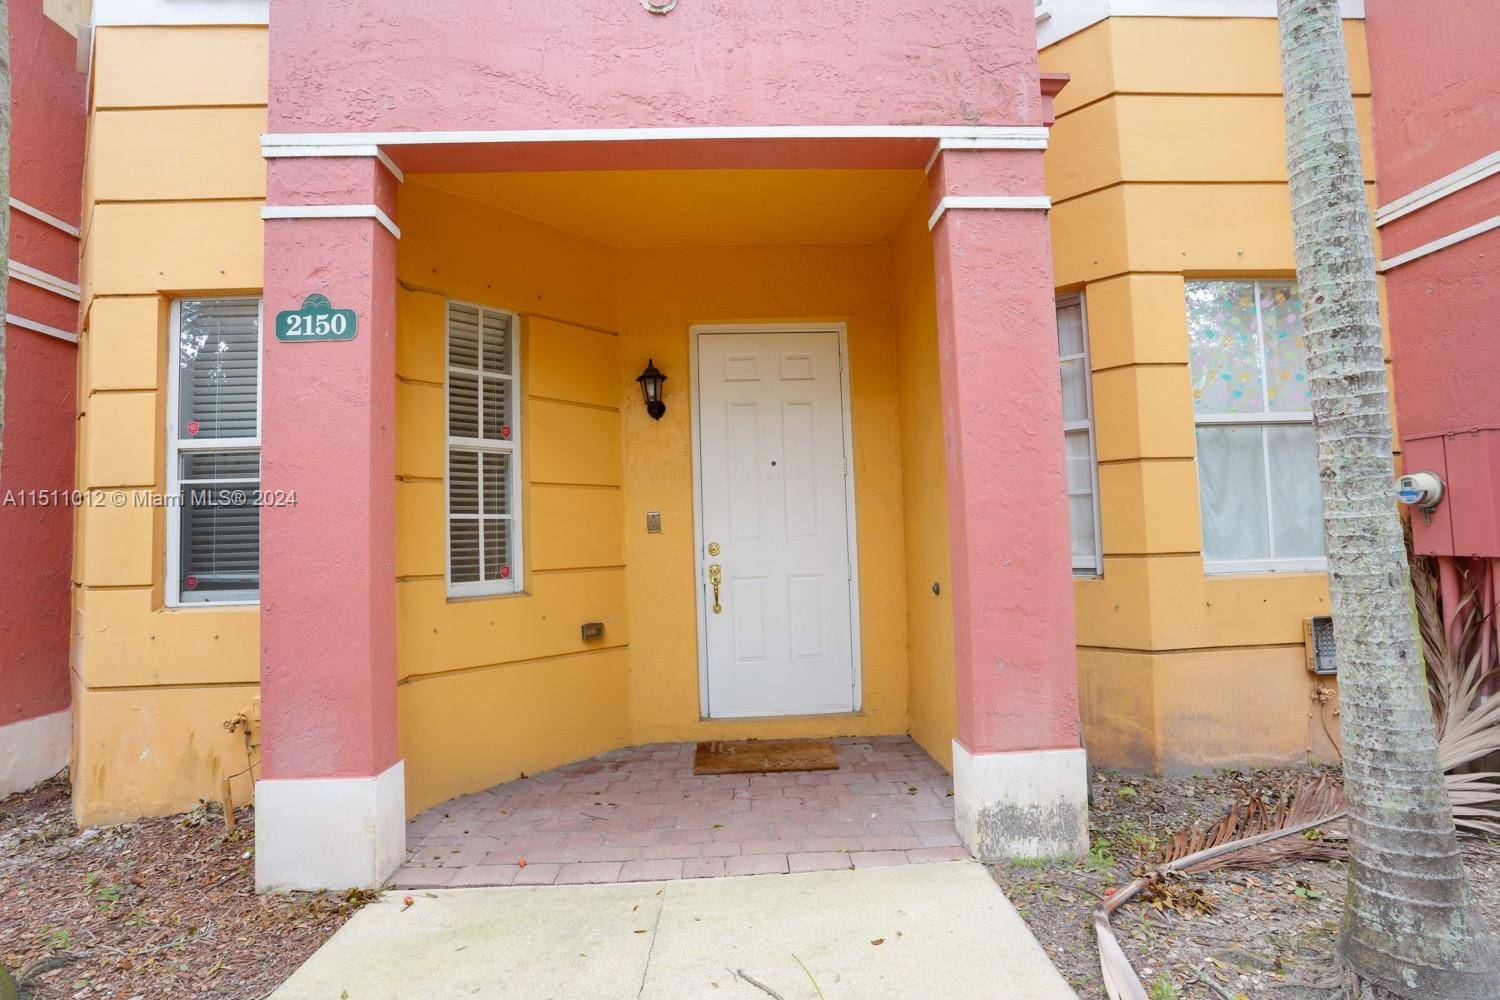 Fantastic 3 bedroom home, 1 car garage in sought after Miami location.